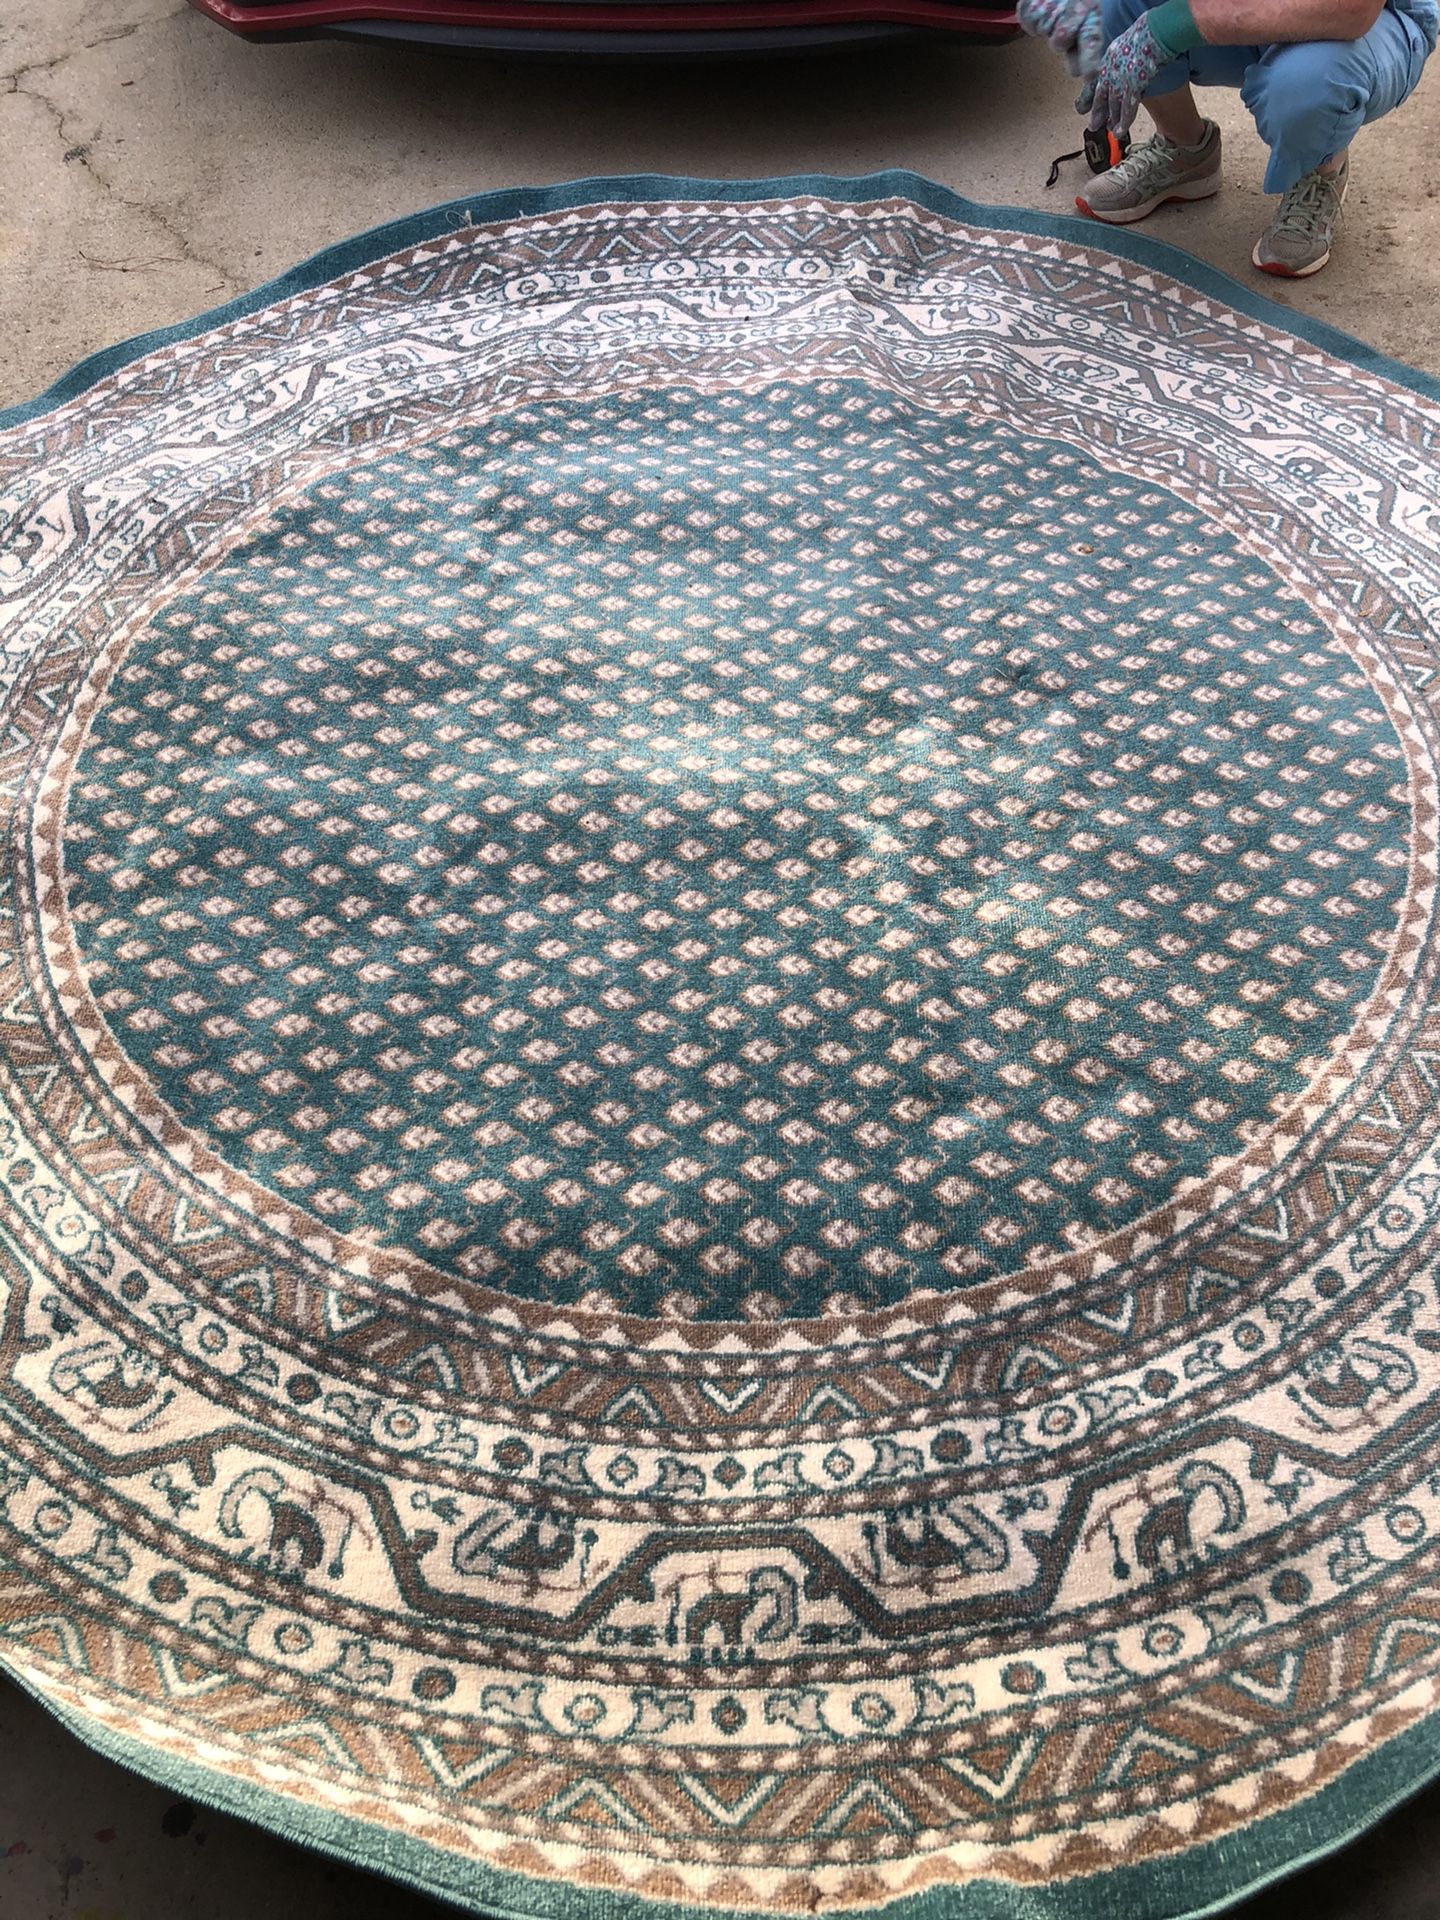 8 foot, Turquoise area rug